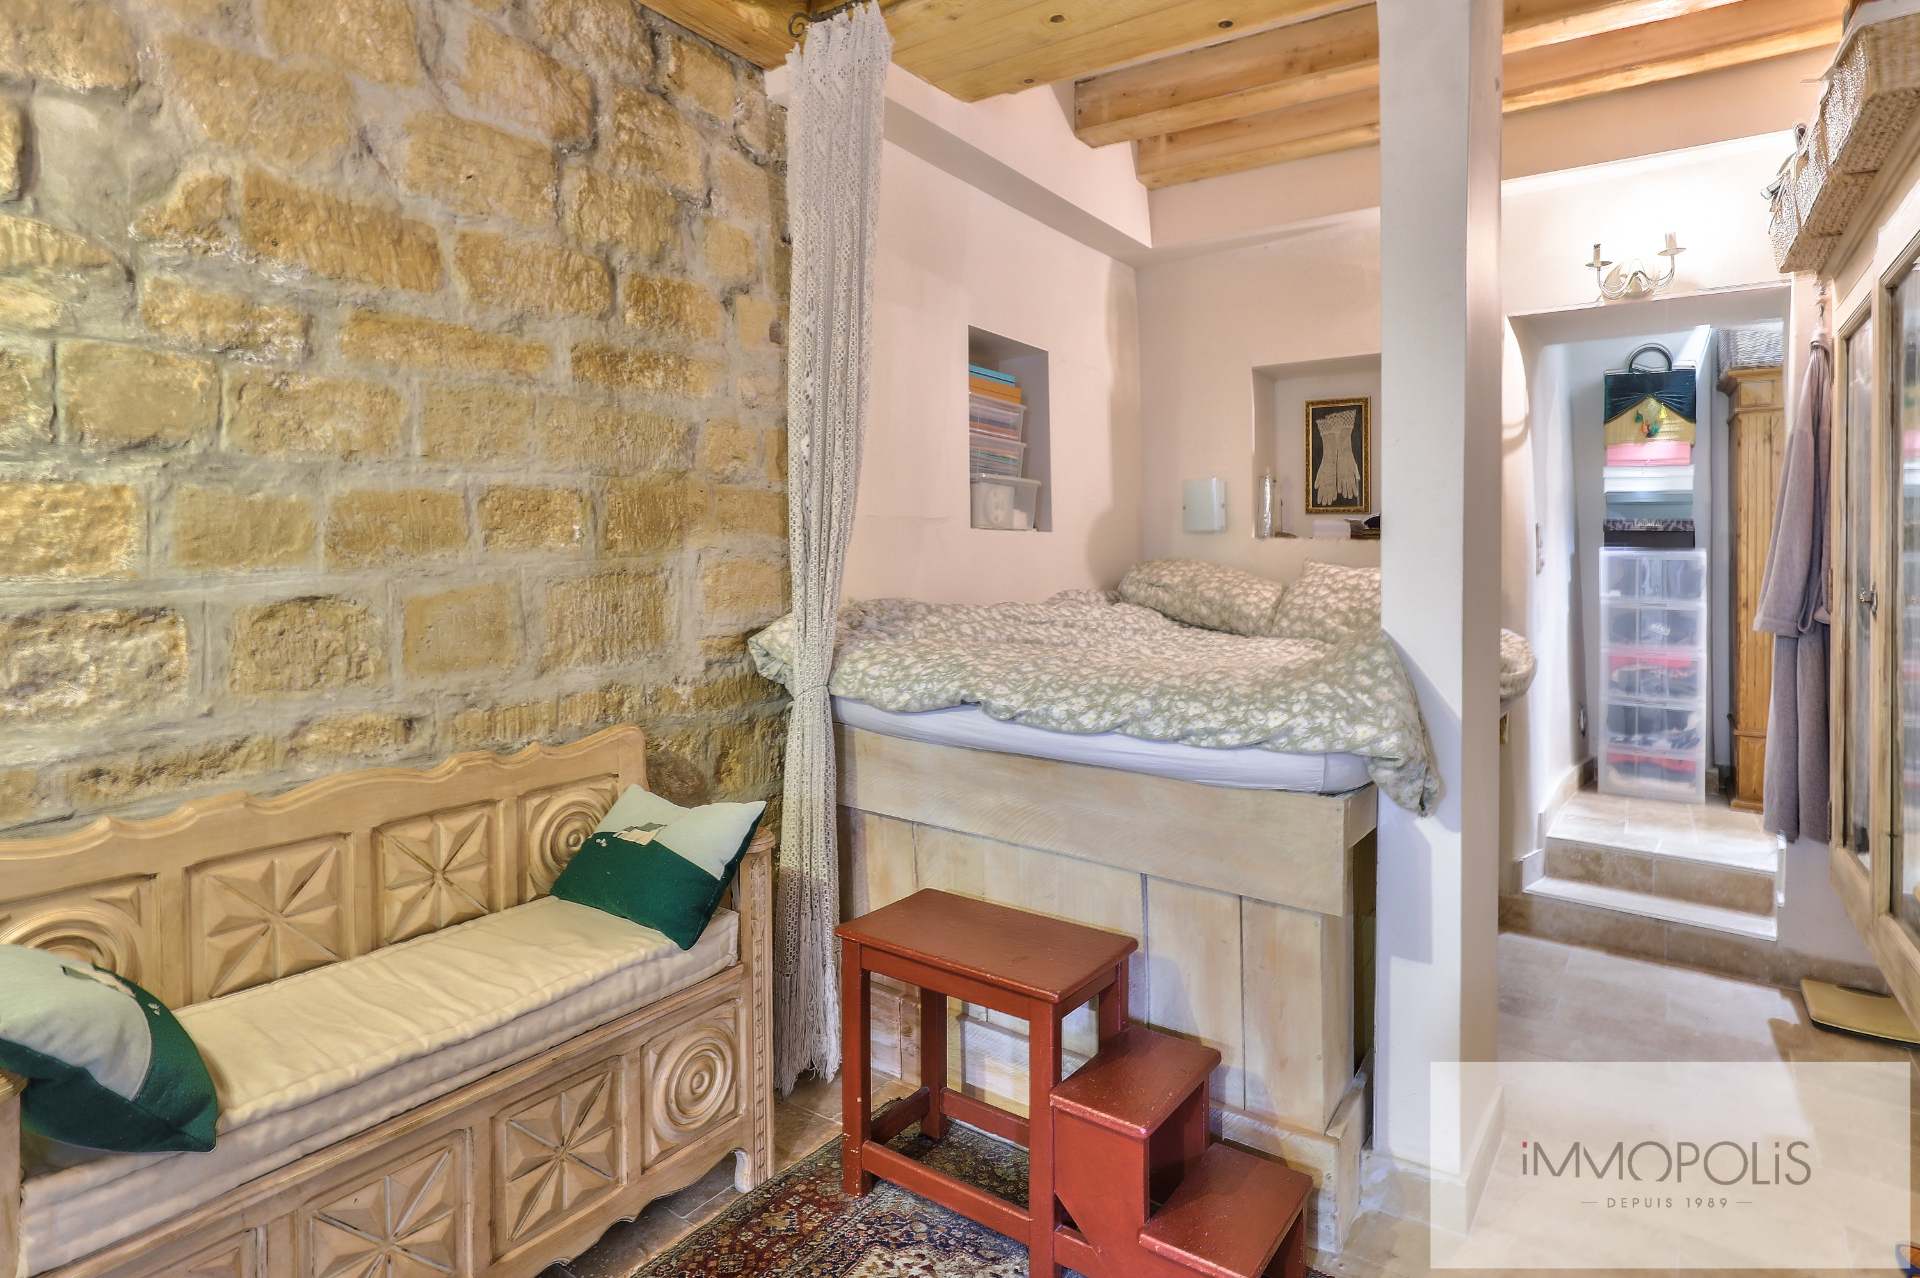 Montmartre, rue Gabrielle, magnificent 2 rooms entirely renovated with stones, bricks and exposed beams: like a house! 8